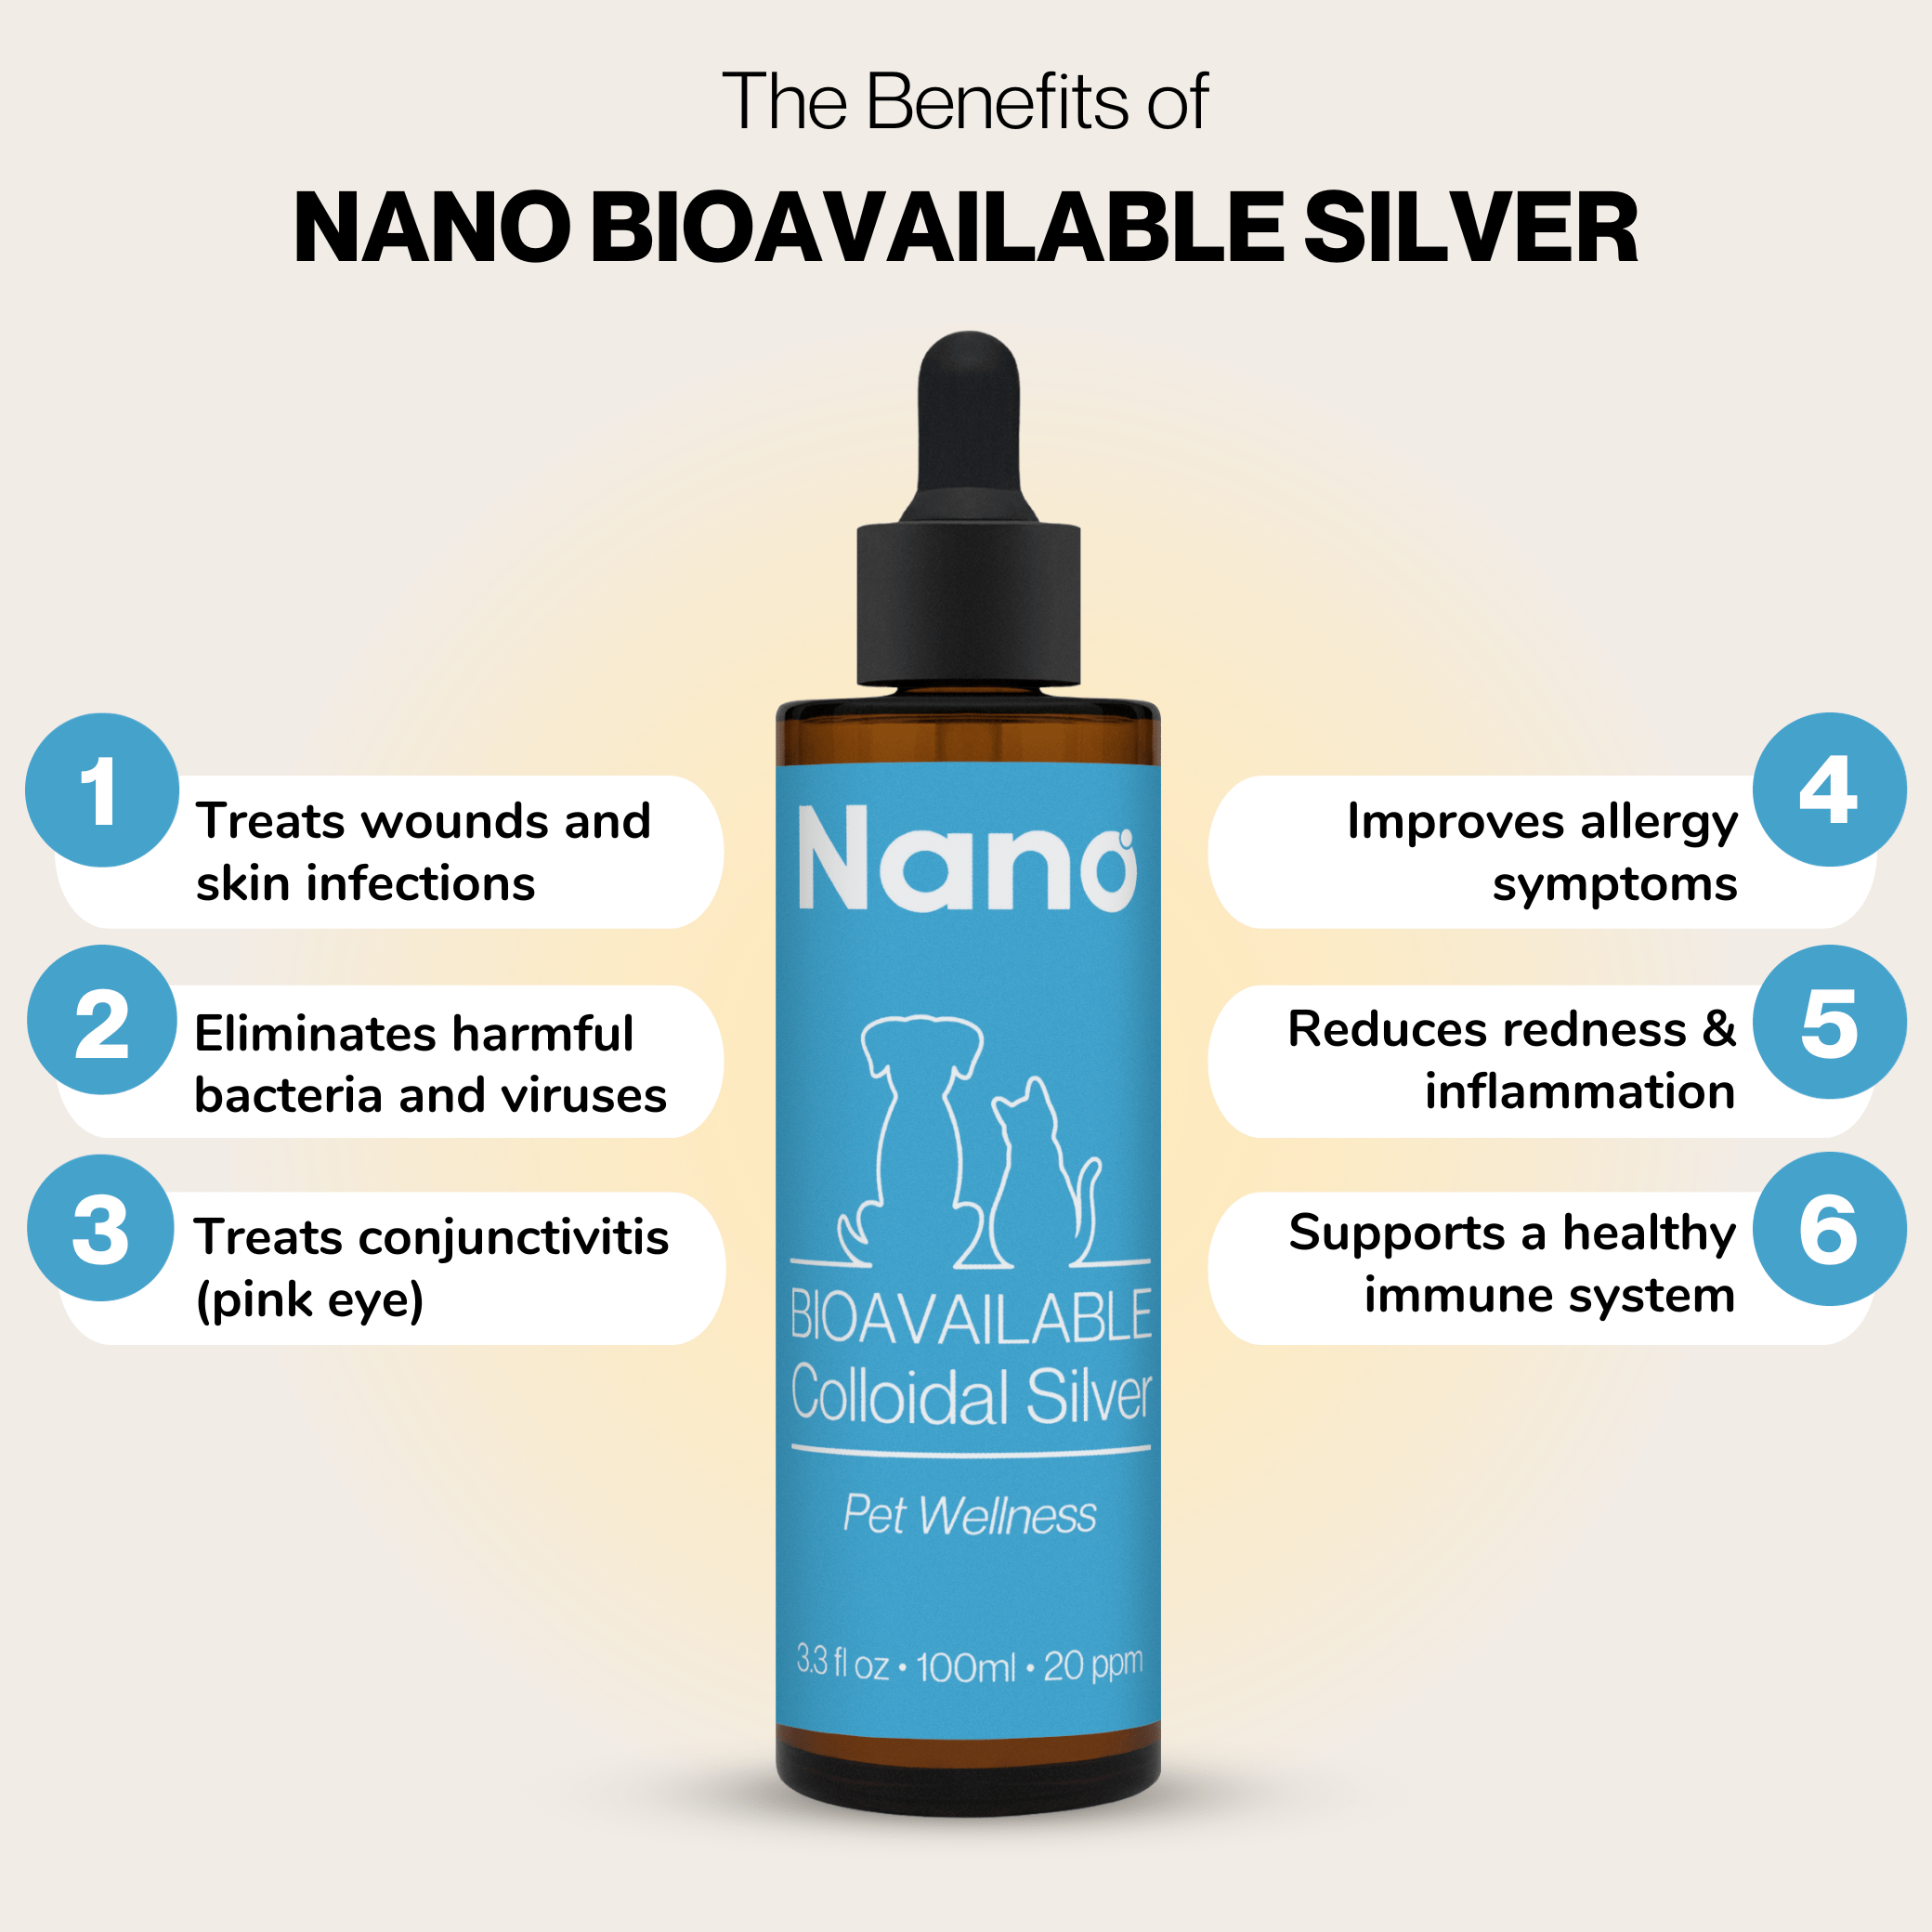 The benefits of Nano 20 ppm bioavailable colloidal silver pet wellness supplement. Treats wounds and skin infections. Eliminates harmful bacteria and viruses. Treats pink eye. Improves allergy symptoms. Reduces redness and inflammation. Supports a healthy immune system